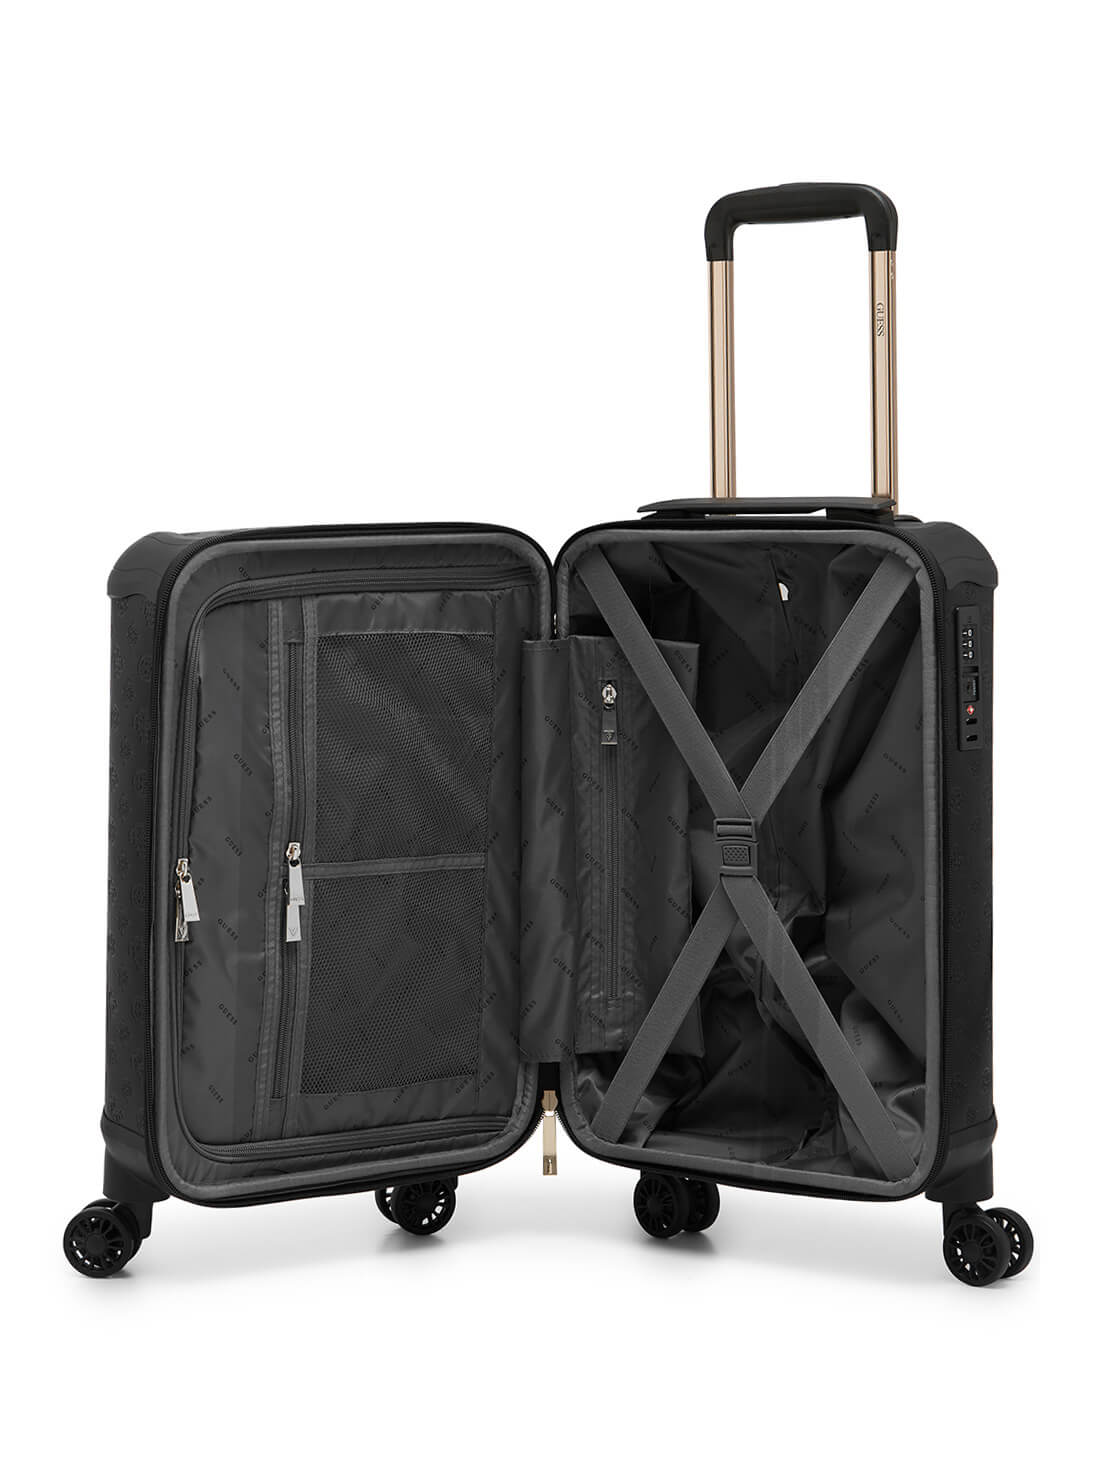 Black Wilder 53cm Suitcase | GUESS Luggage | inside view